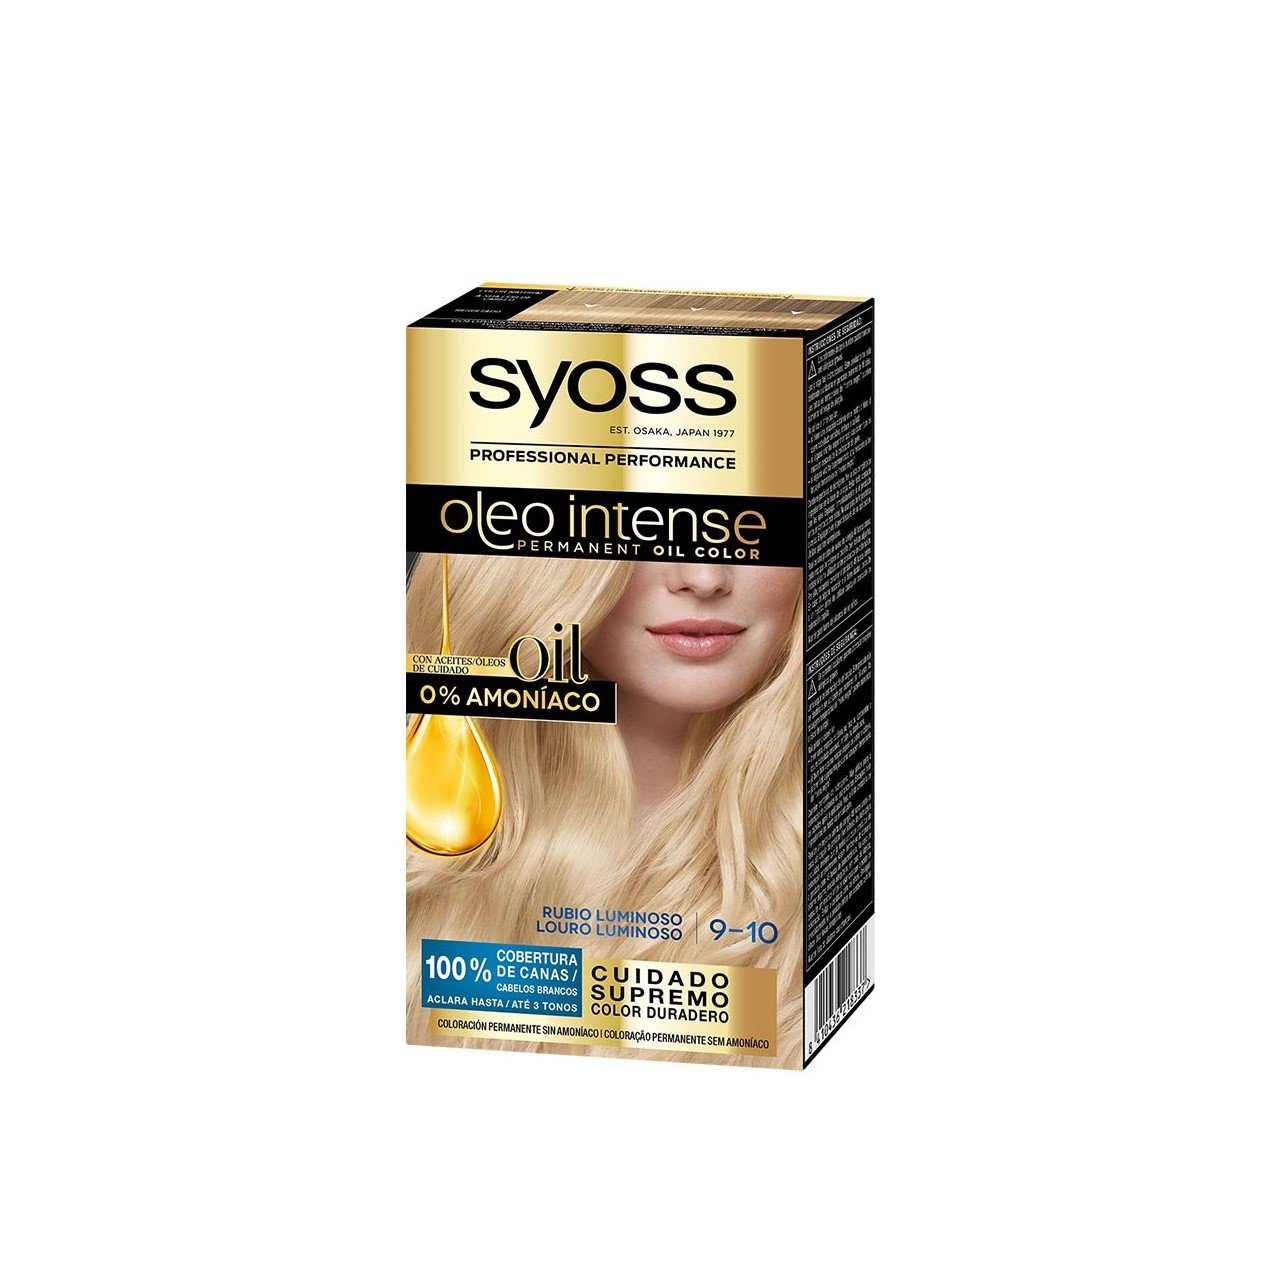 Syoss Oleo Intense Permanent Oil Color 9-10 Bright Blonde Permanent Hair Dye